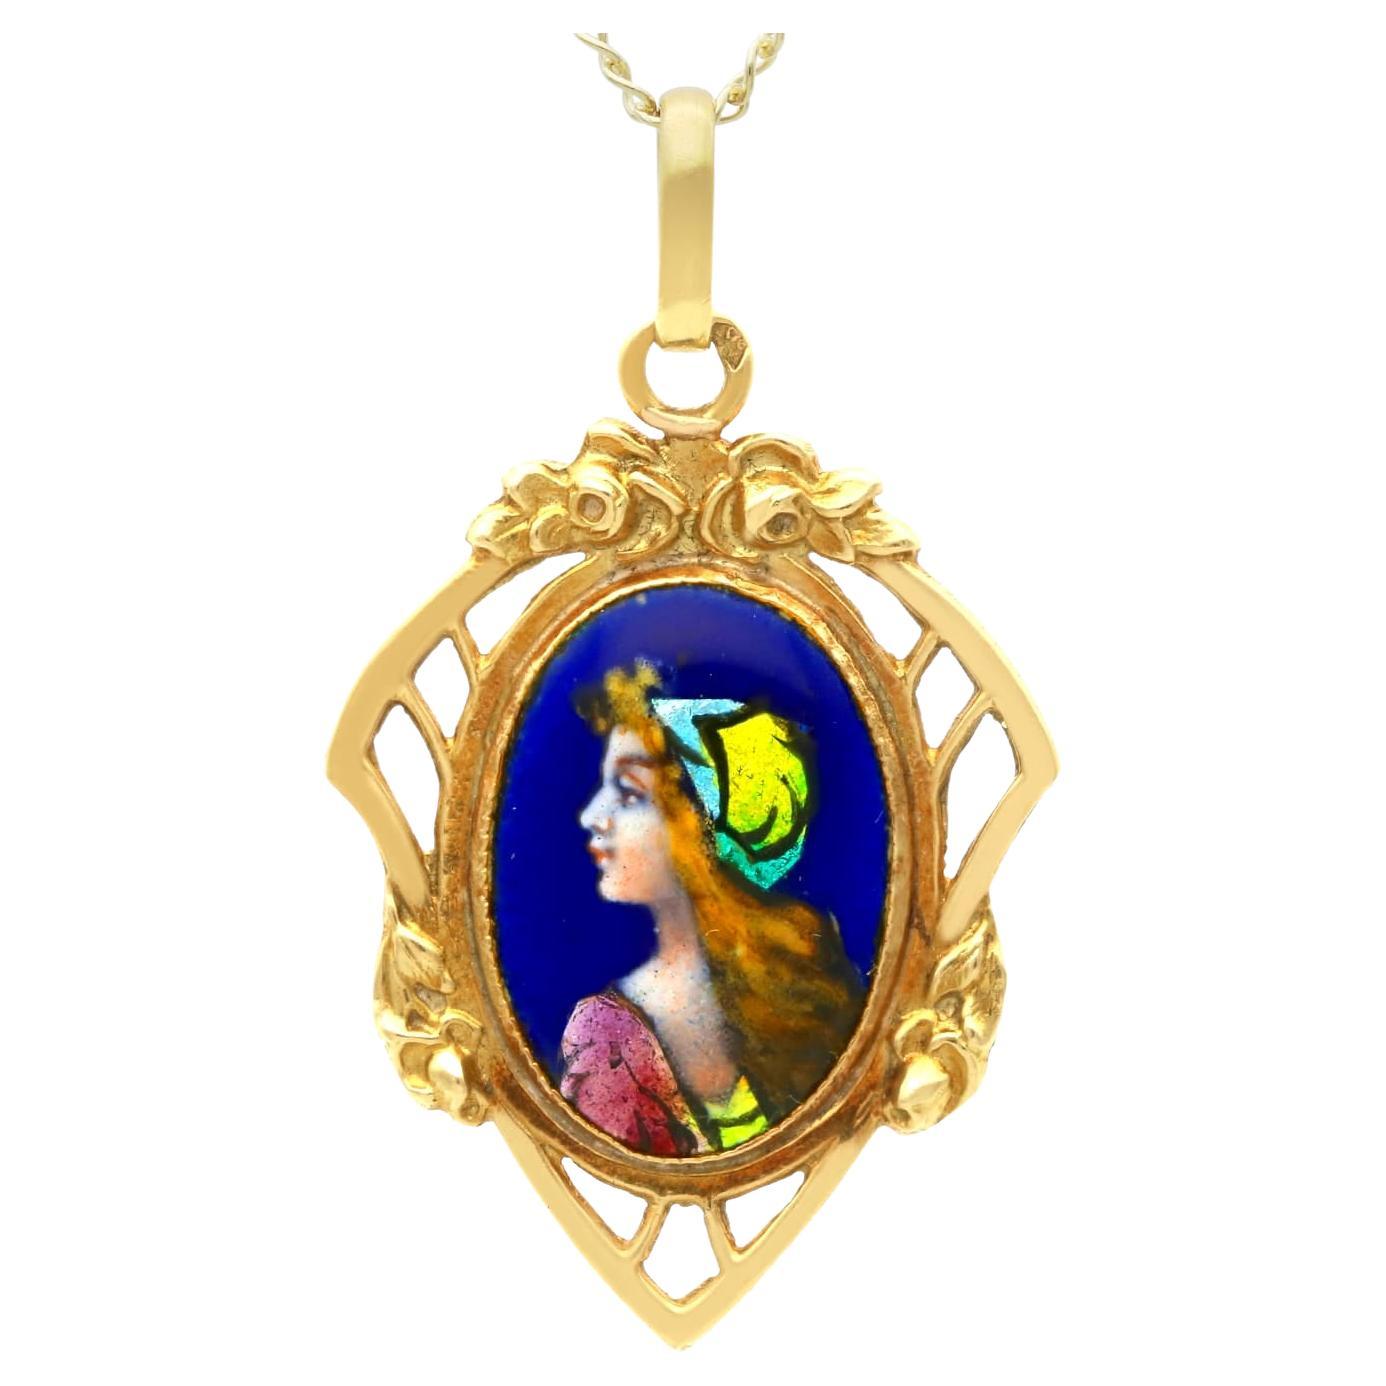 Antique French Enamel and 18k Yellow Gold Pendant